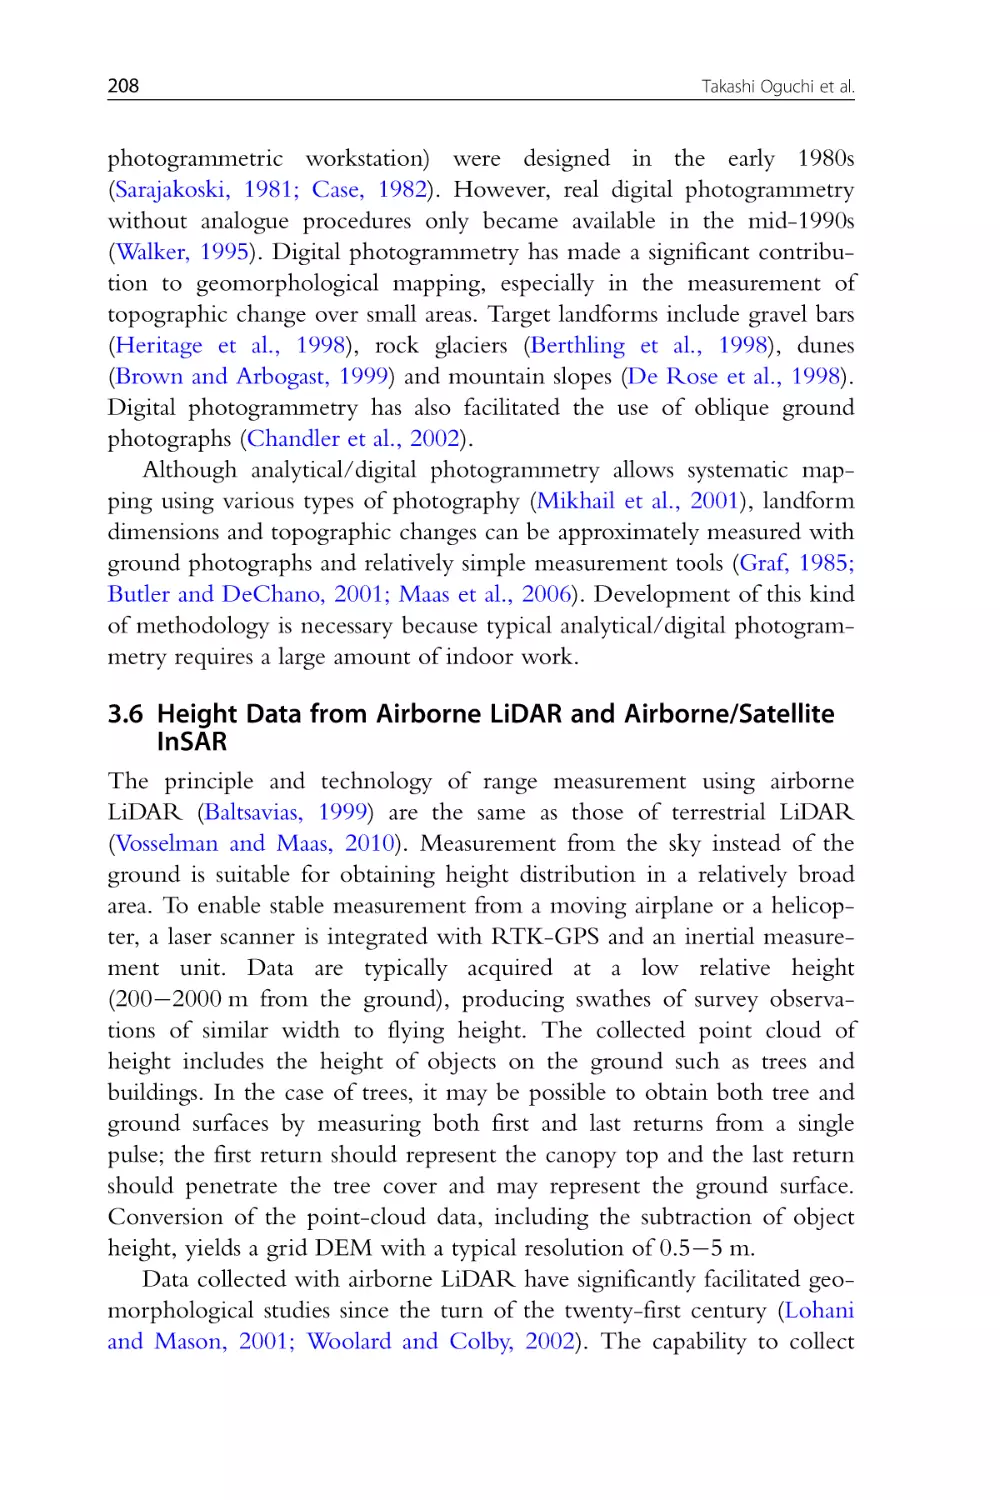 3.6 Height Data from Airborne LiDAR and Airborne/Satellite InSAR